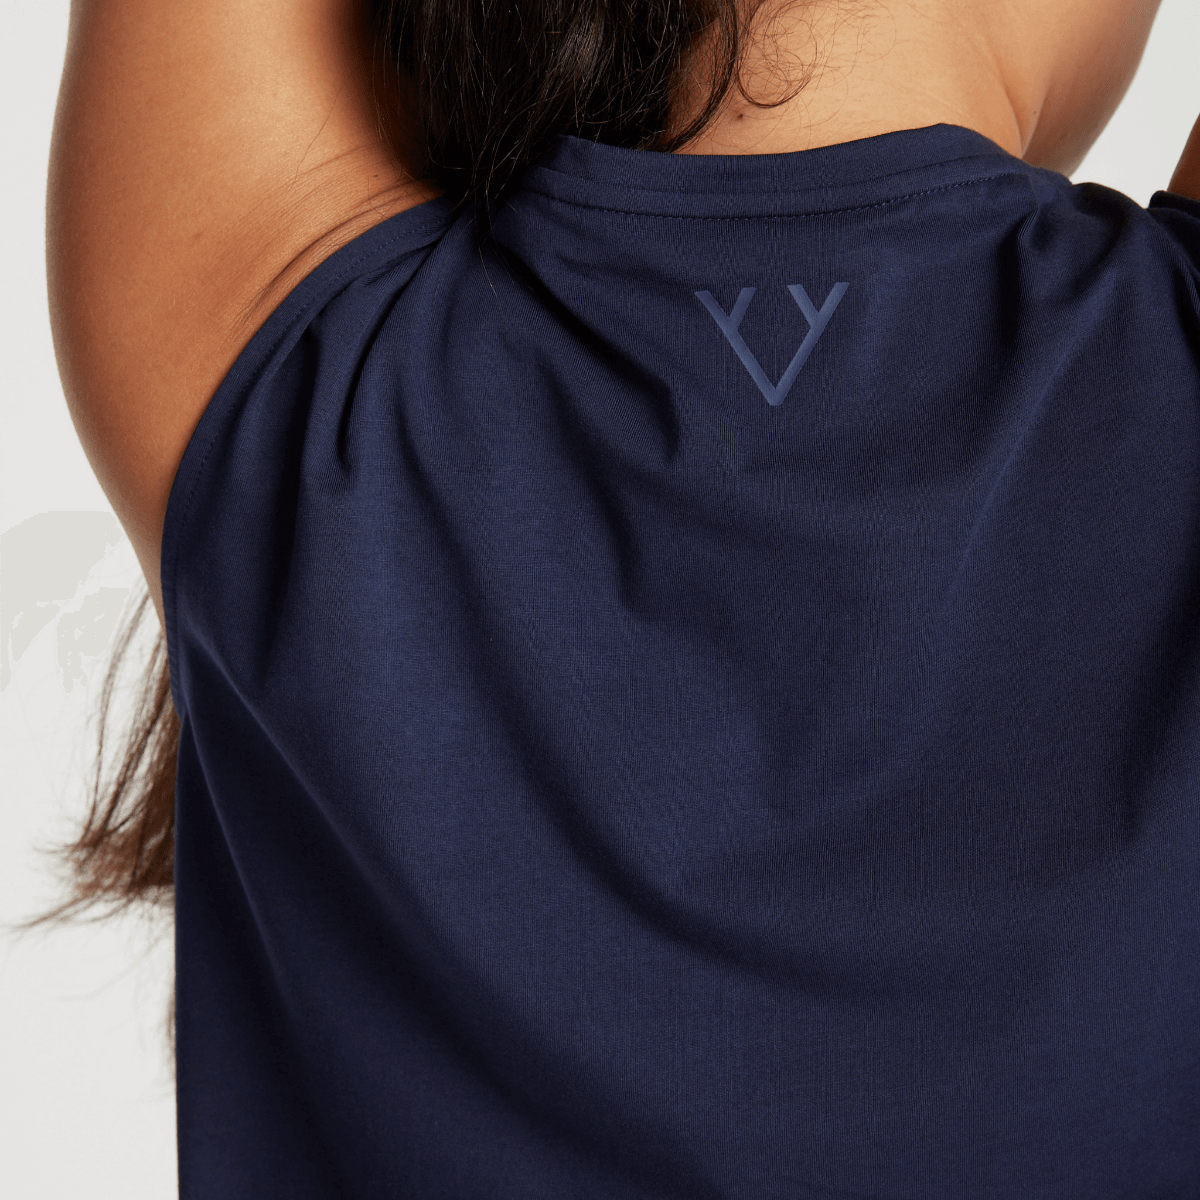 Victoria Stag's Core Muscle Tank in Navy back logo